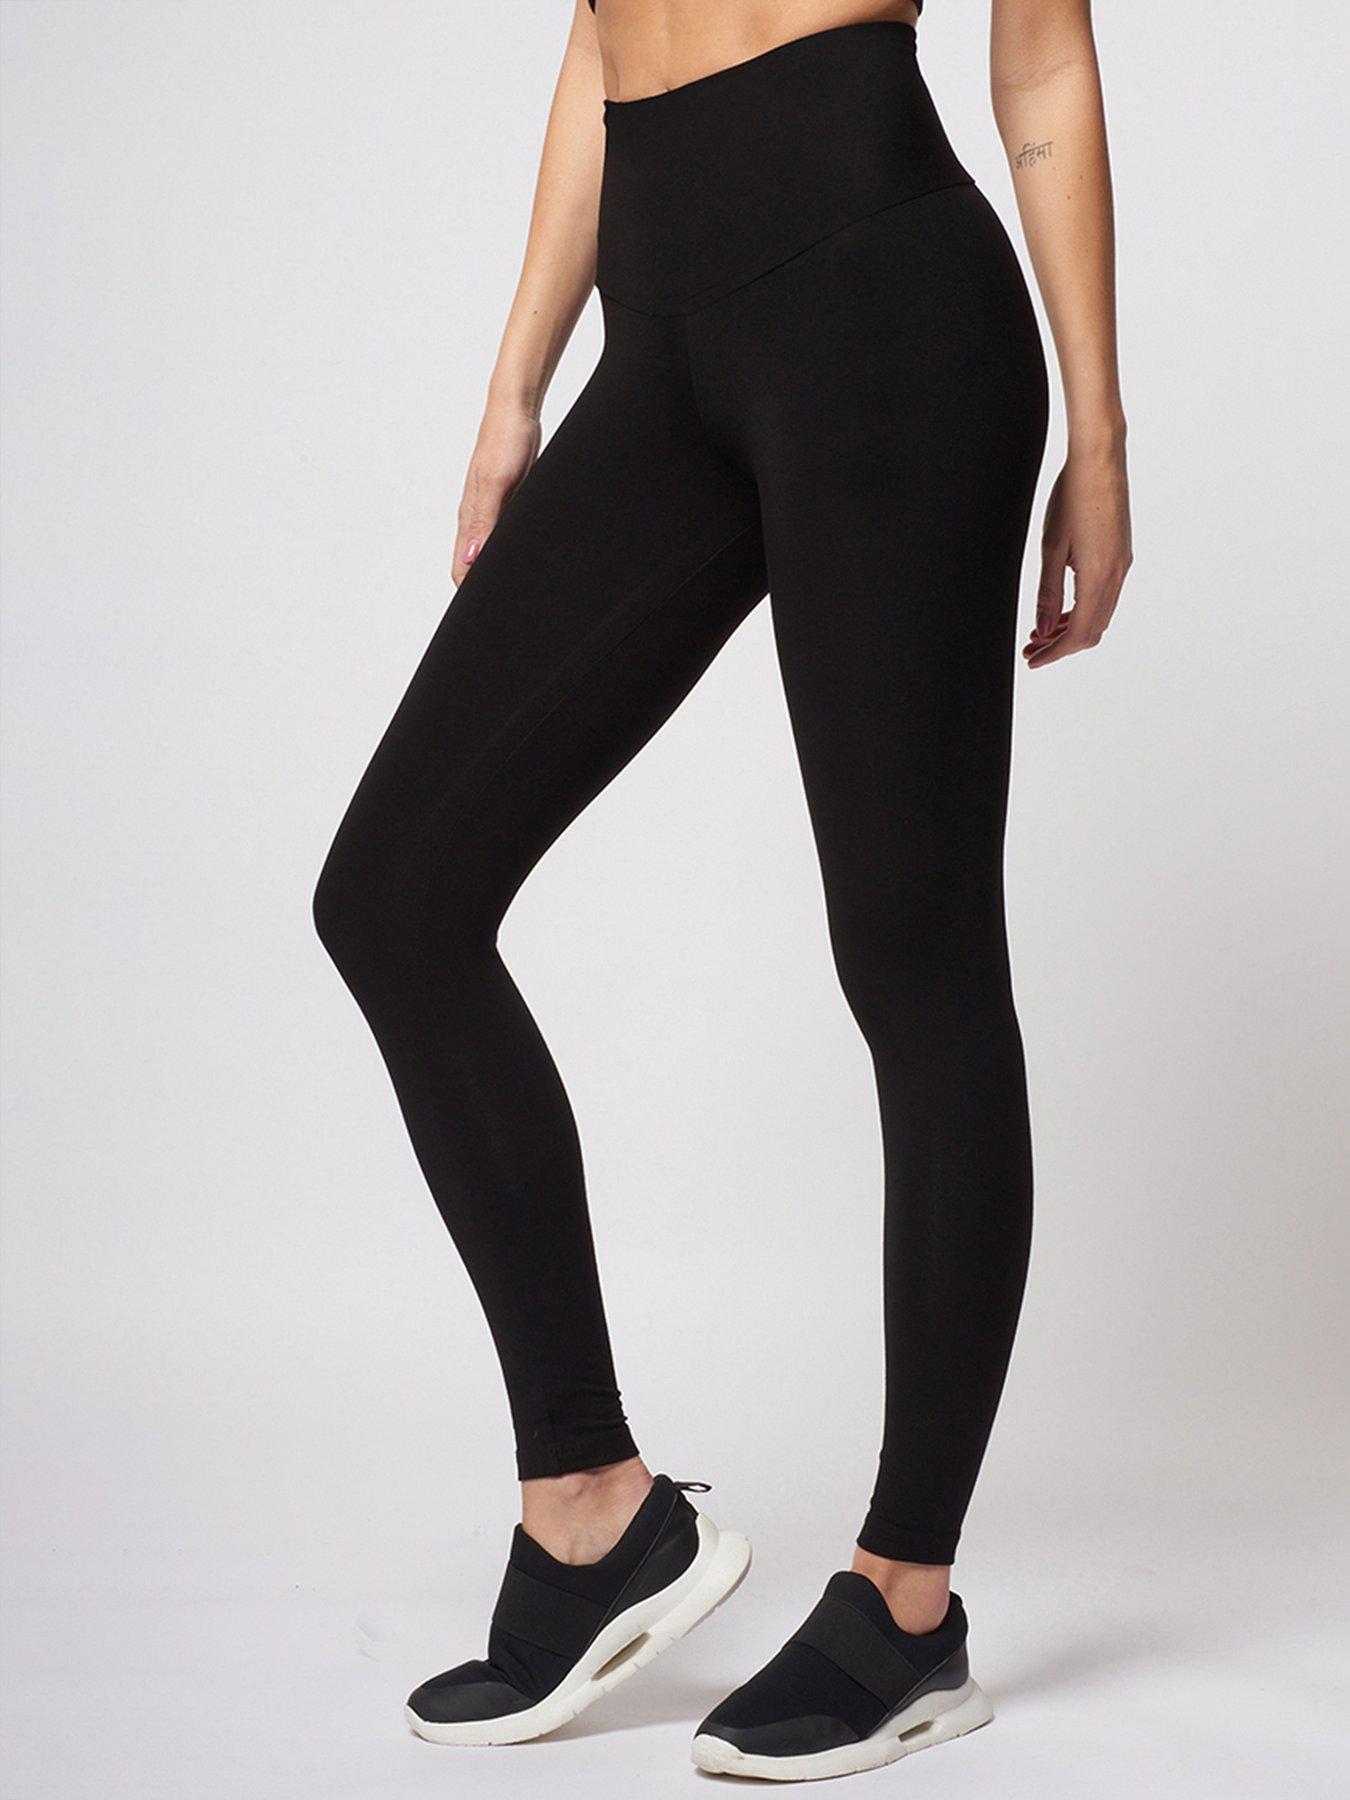 Extra Strong Compression Black Gym Leggings with Side Pockets